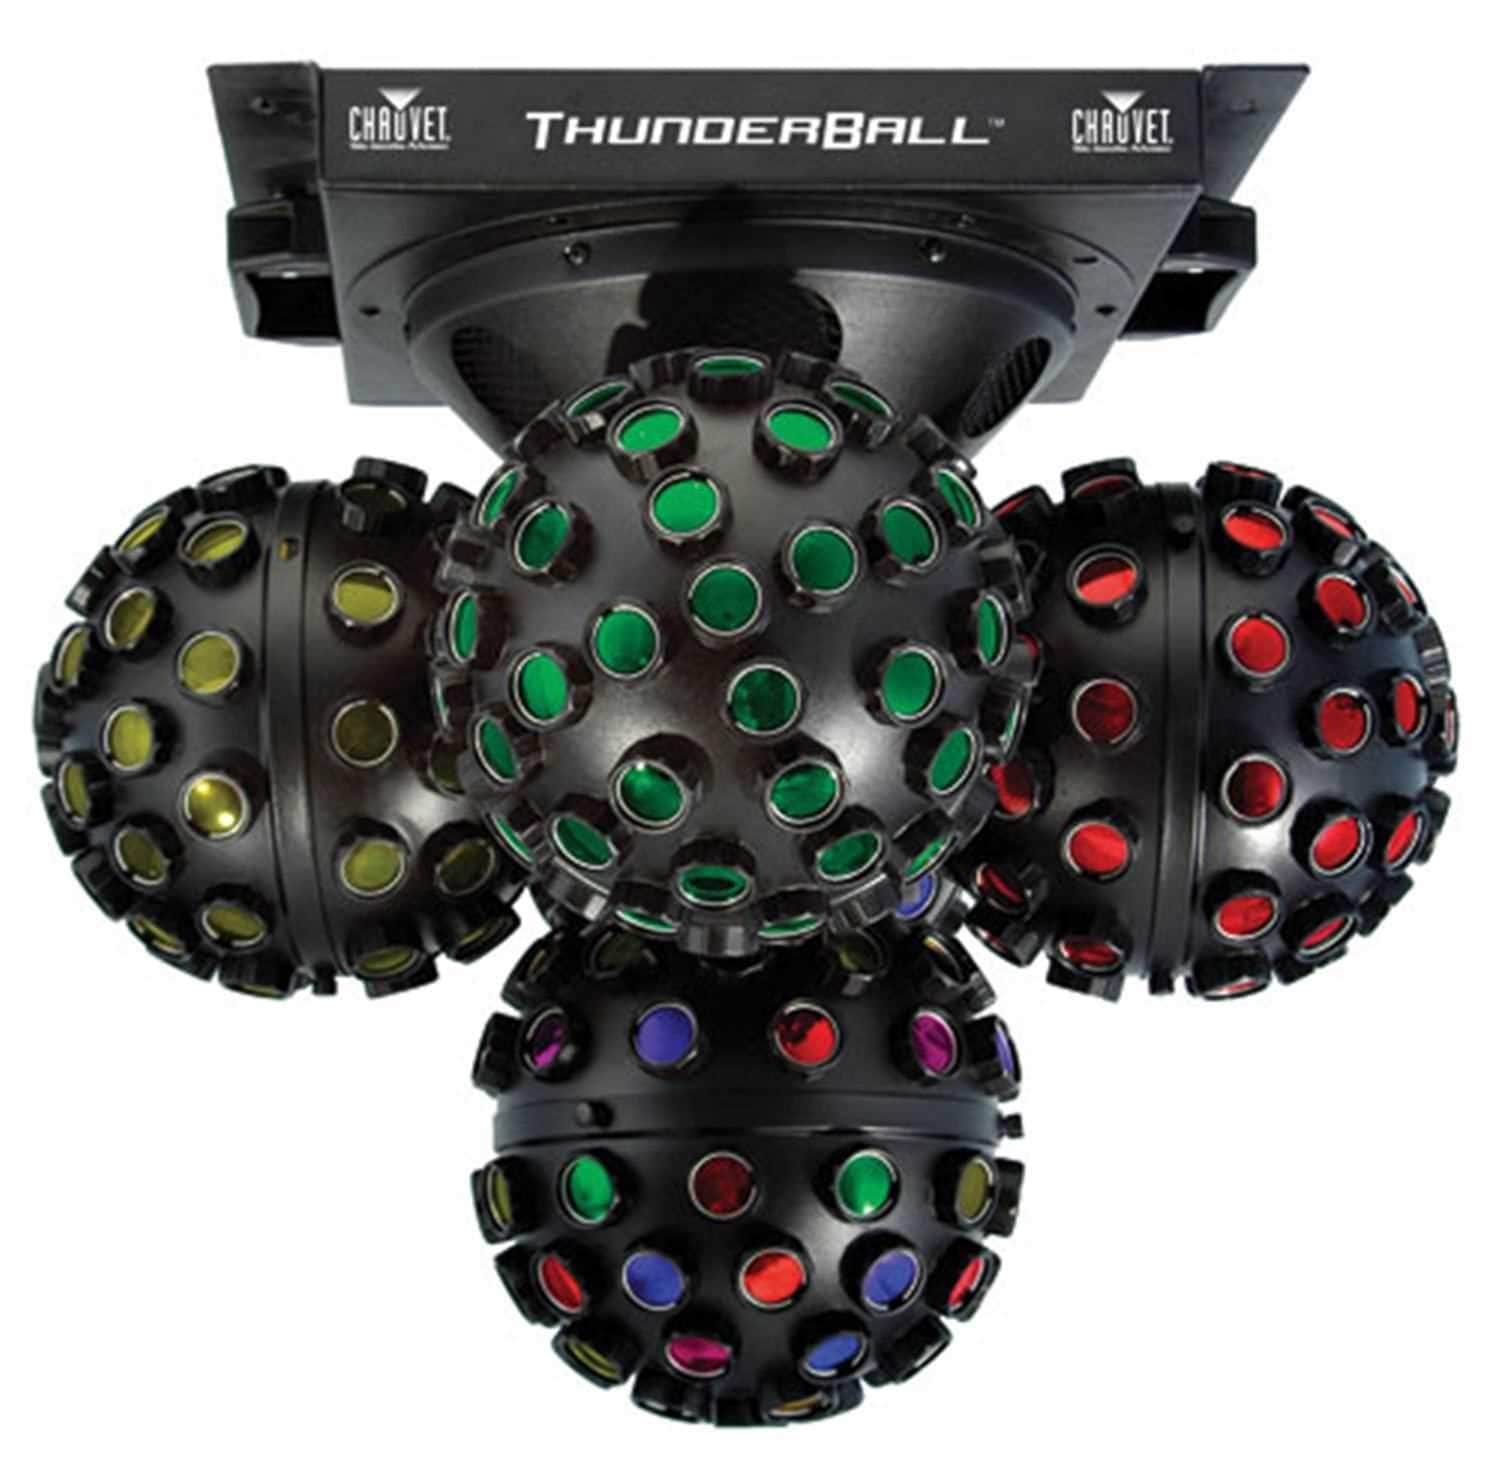 Chauvet CH-450 Thunderball Effects Light - ProSound and Stage Lighting